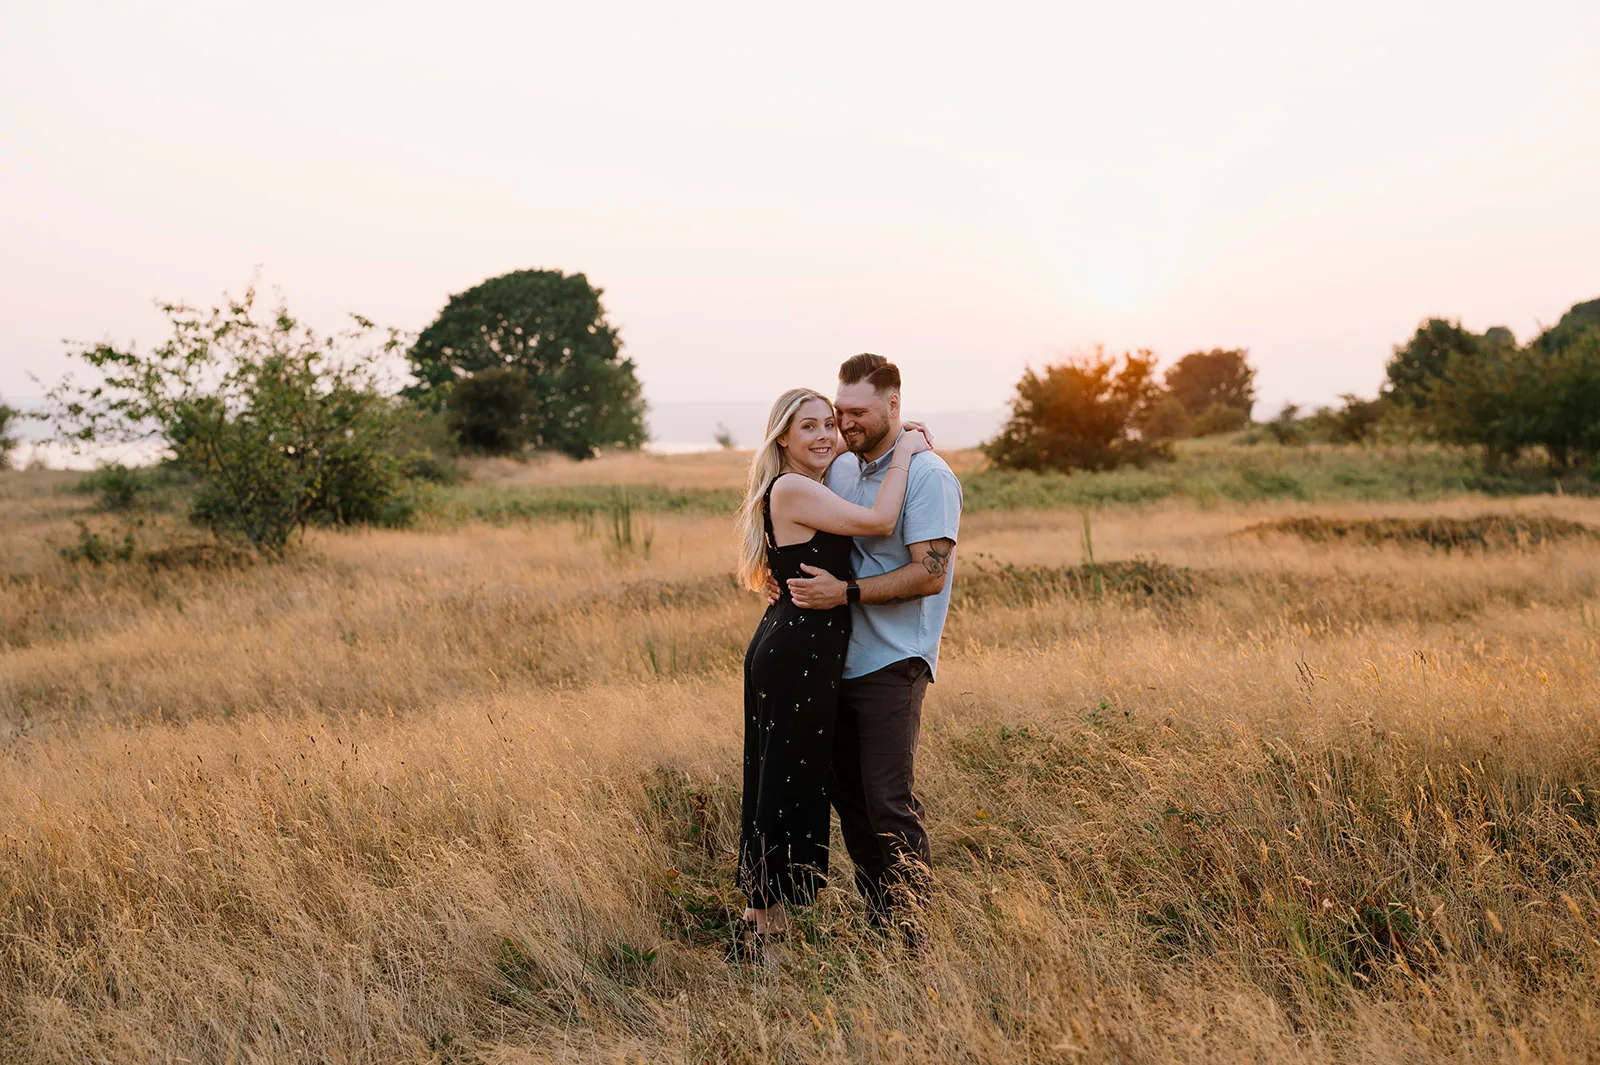 A couple embracing in a sunlit meadow with tall grass, trees in the background, and a warm sunset creating a romantic atmosphere.